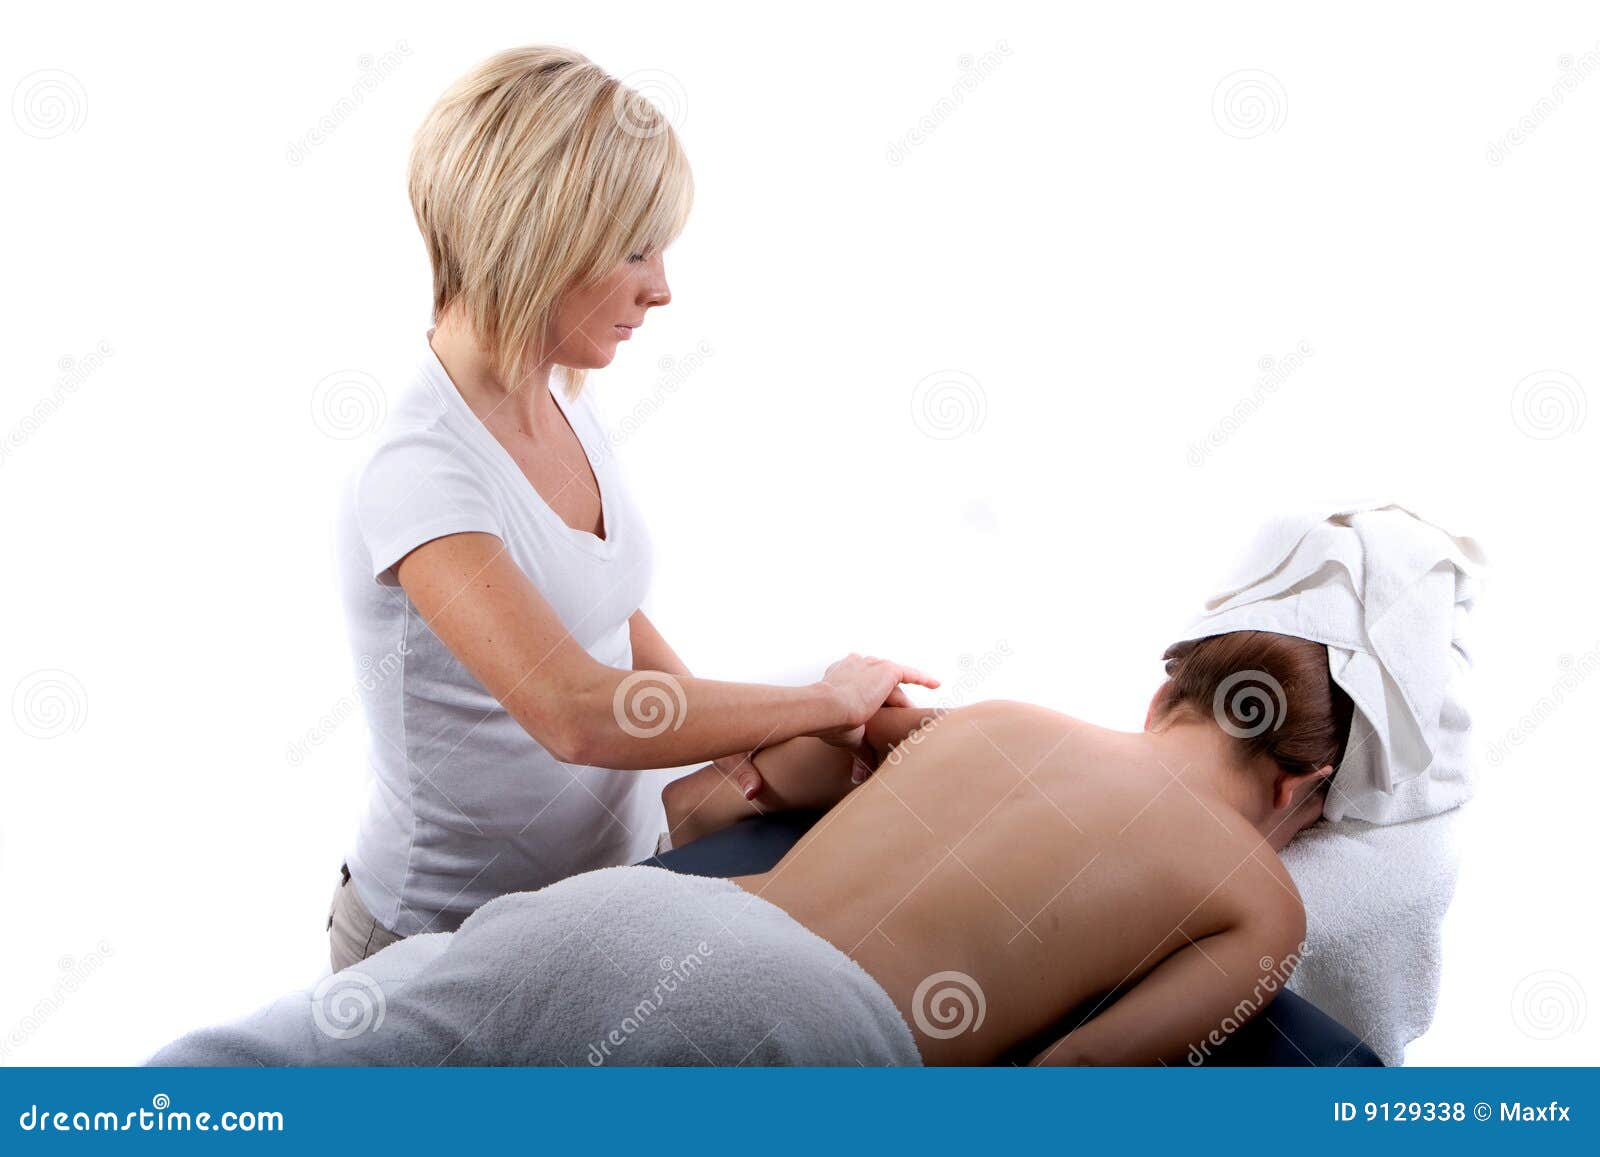 Arm massage - Stock Image - F025/0051 - Science Photo Library